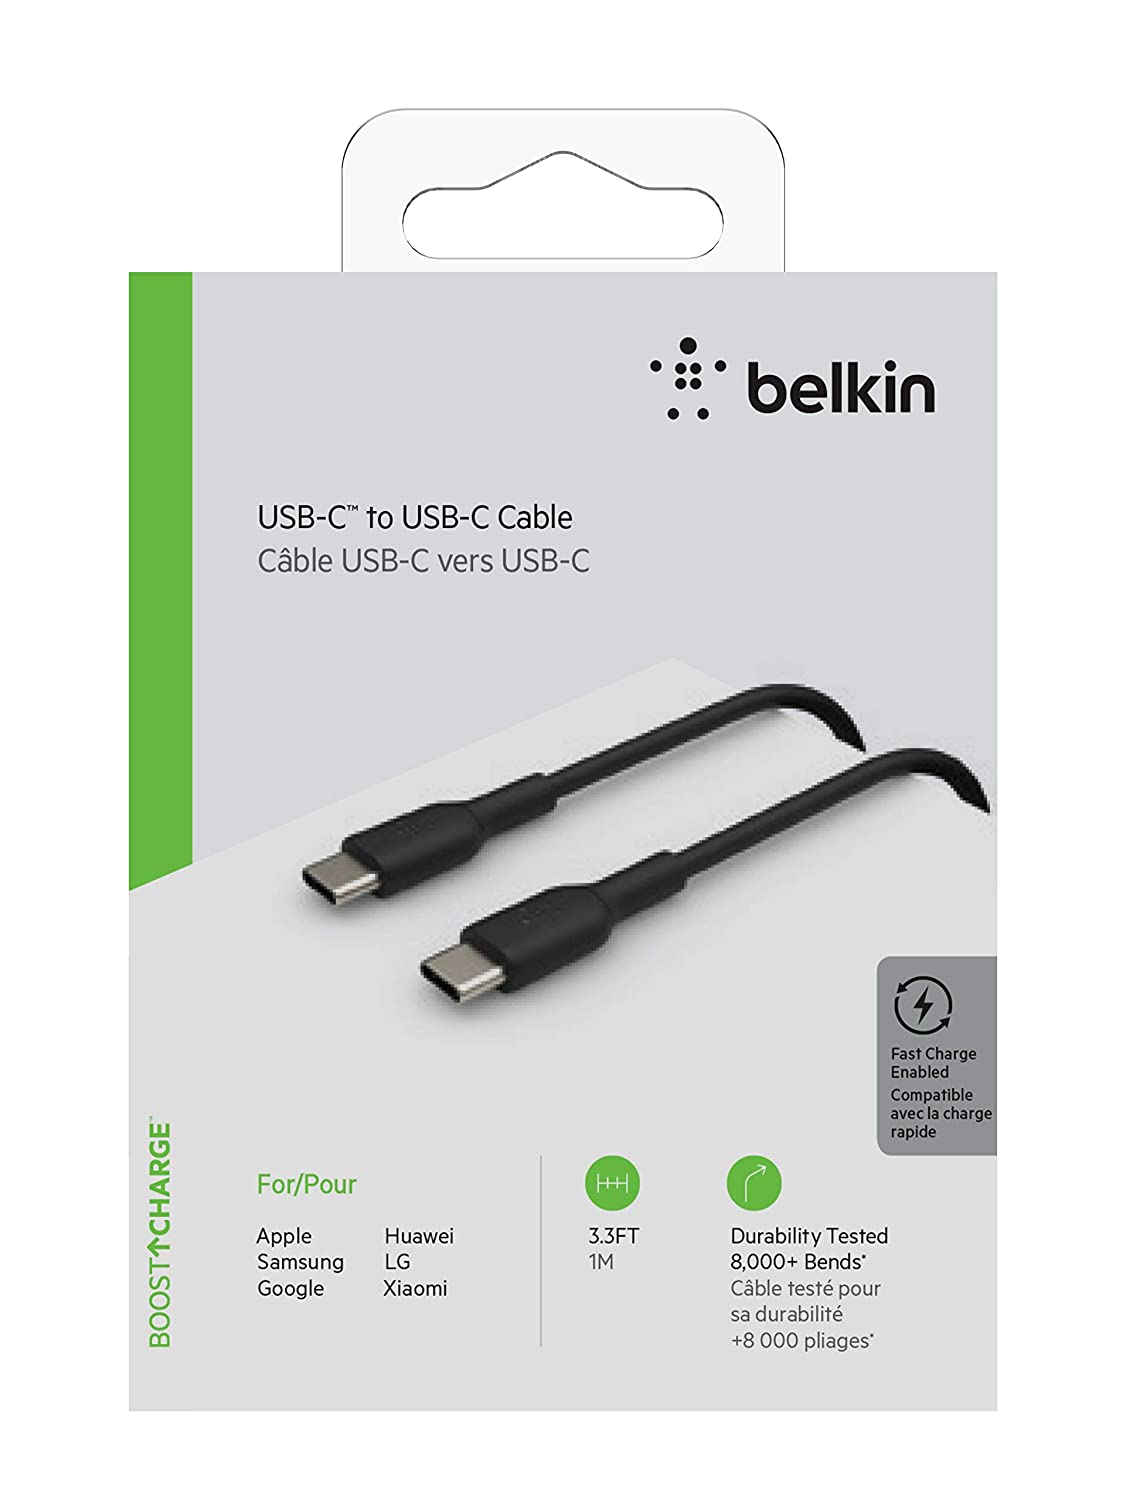 Belkin USB-C to USB-C Cable (USB-C Fast Charge Cable for S20, S10, Note10, Note9, Pixel 4, Pixel 3, iPad Pro, more) USB Type-C Cable (3.3ft/1m, black) Cable 3.3 feet Black